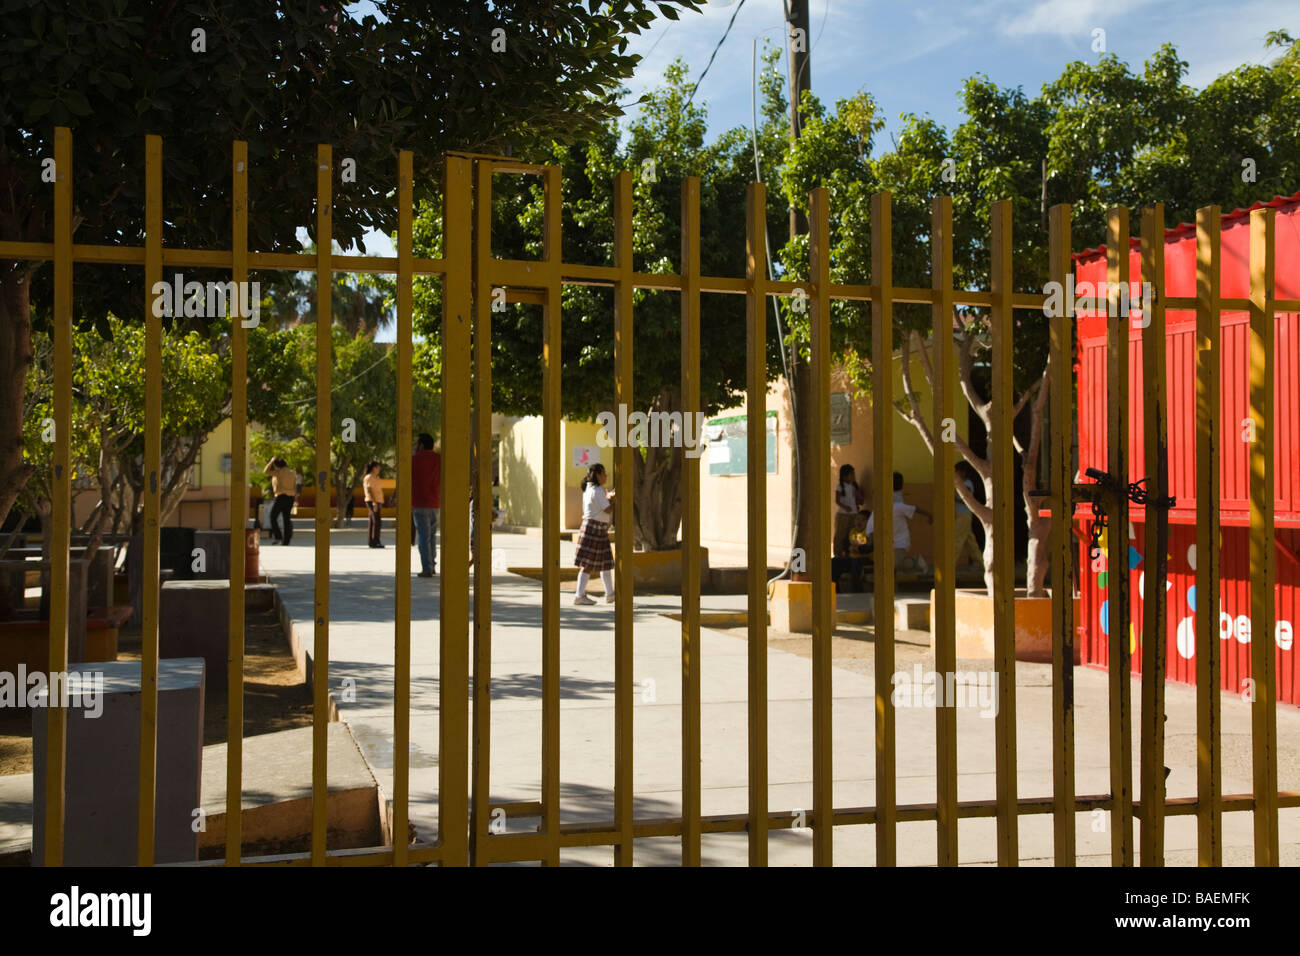 MEXICO La Playita Mexican elementary school children walk across courtyard between school buildings secured by iron fence Stock Photo